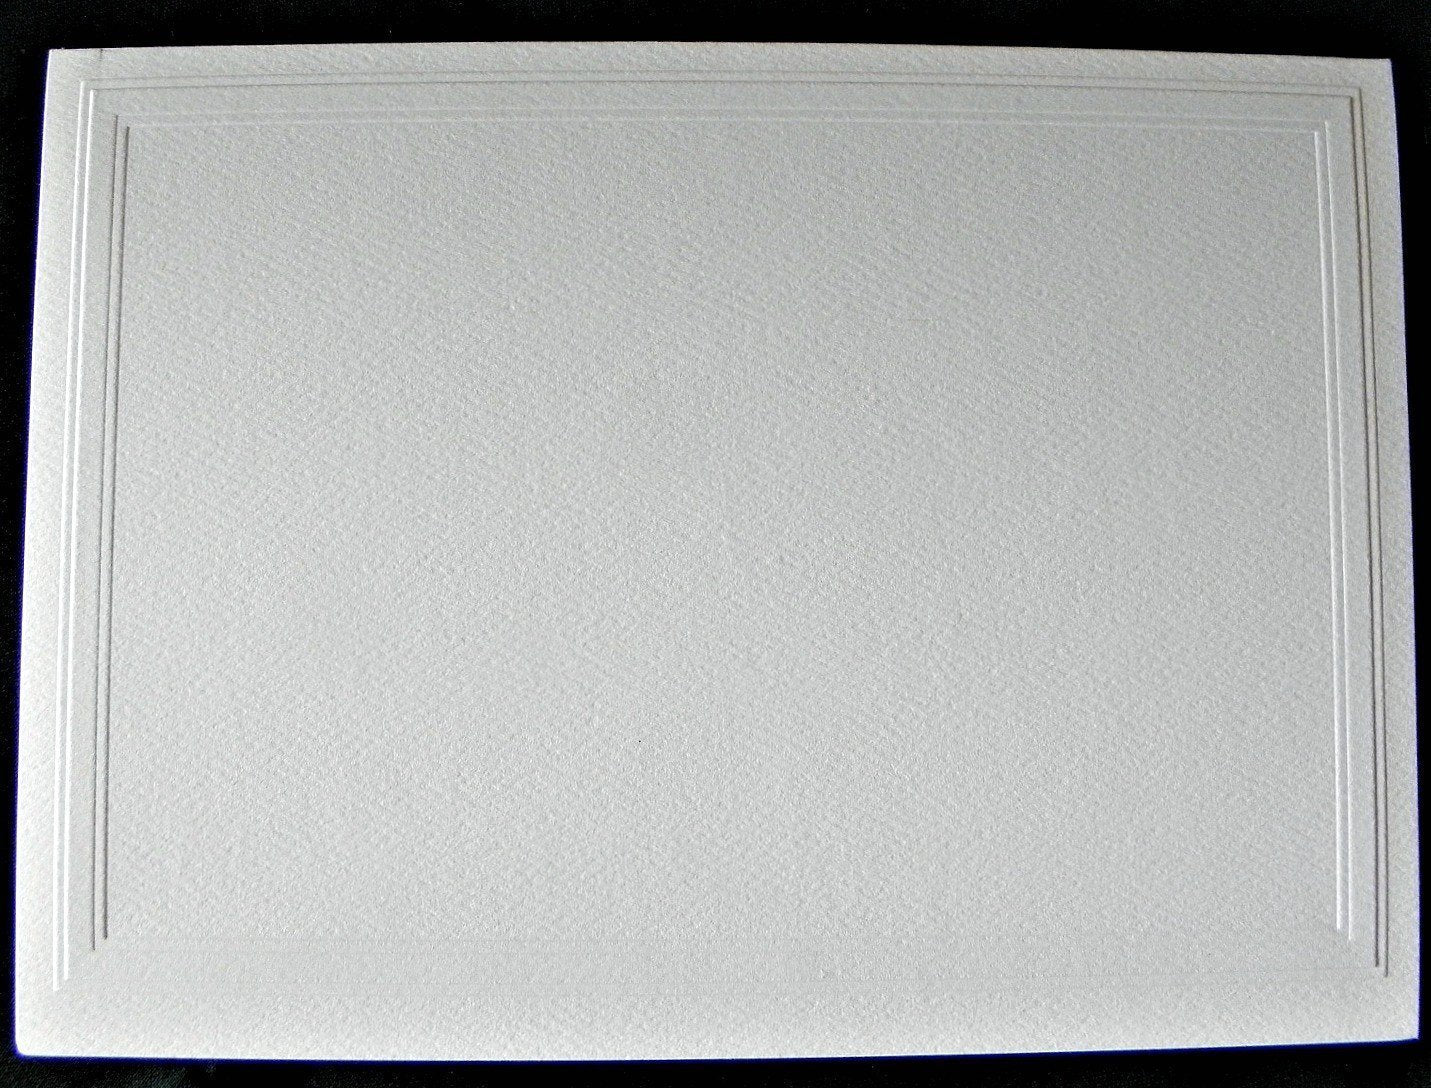 The Classic embossed card stock